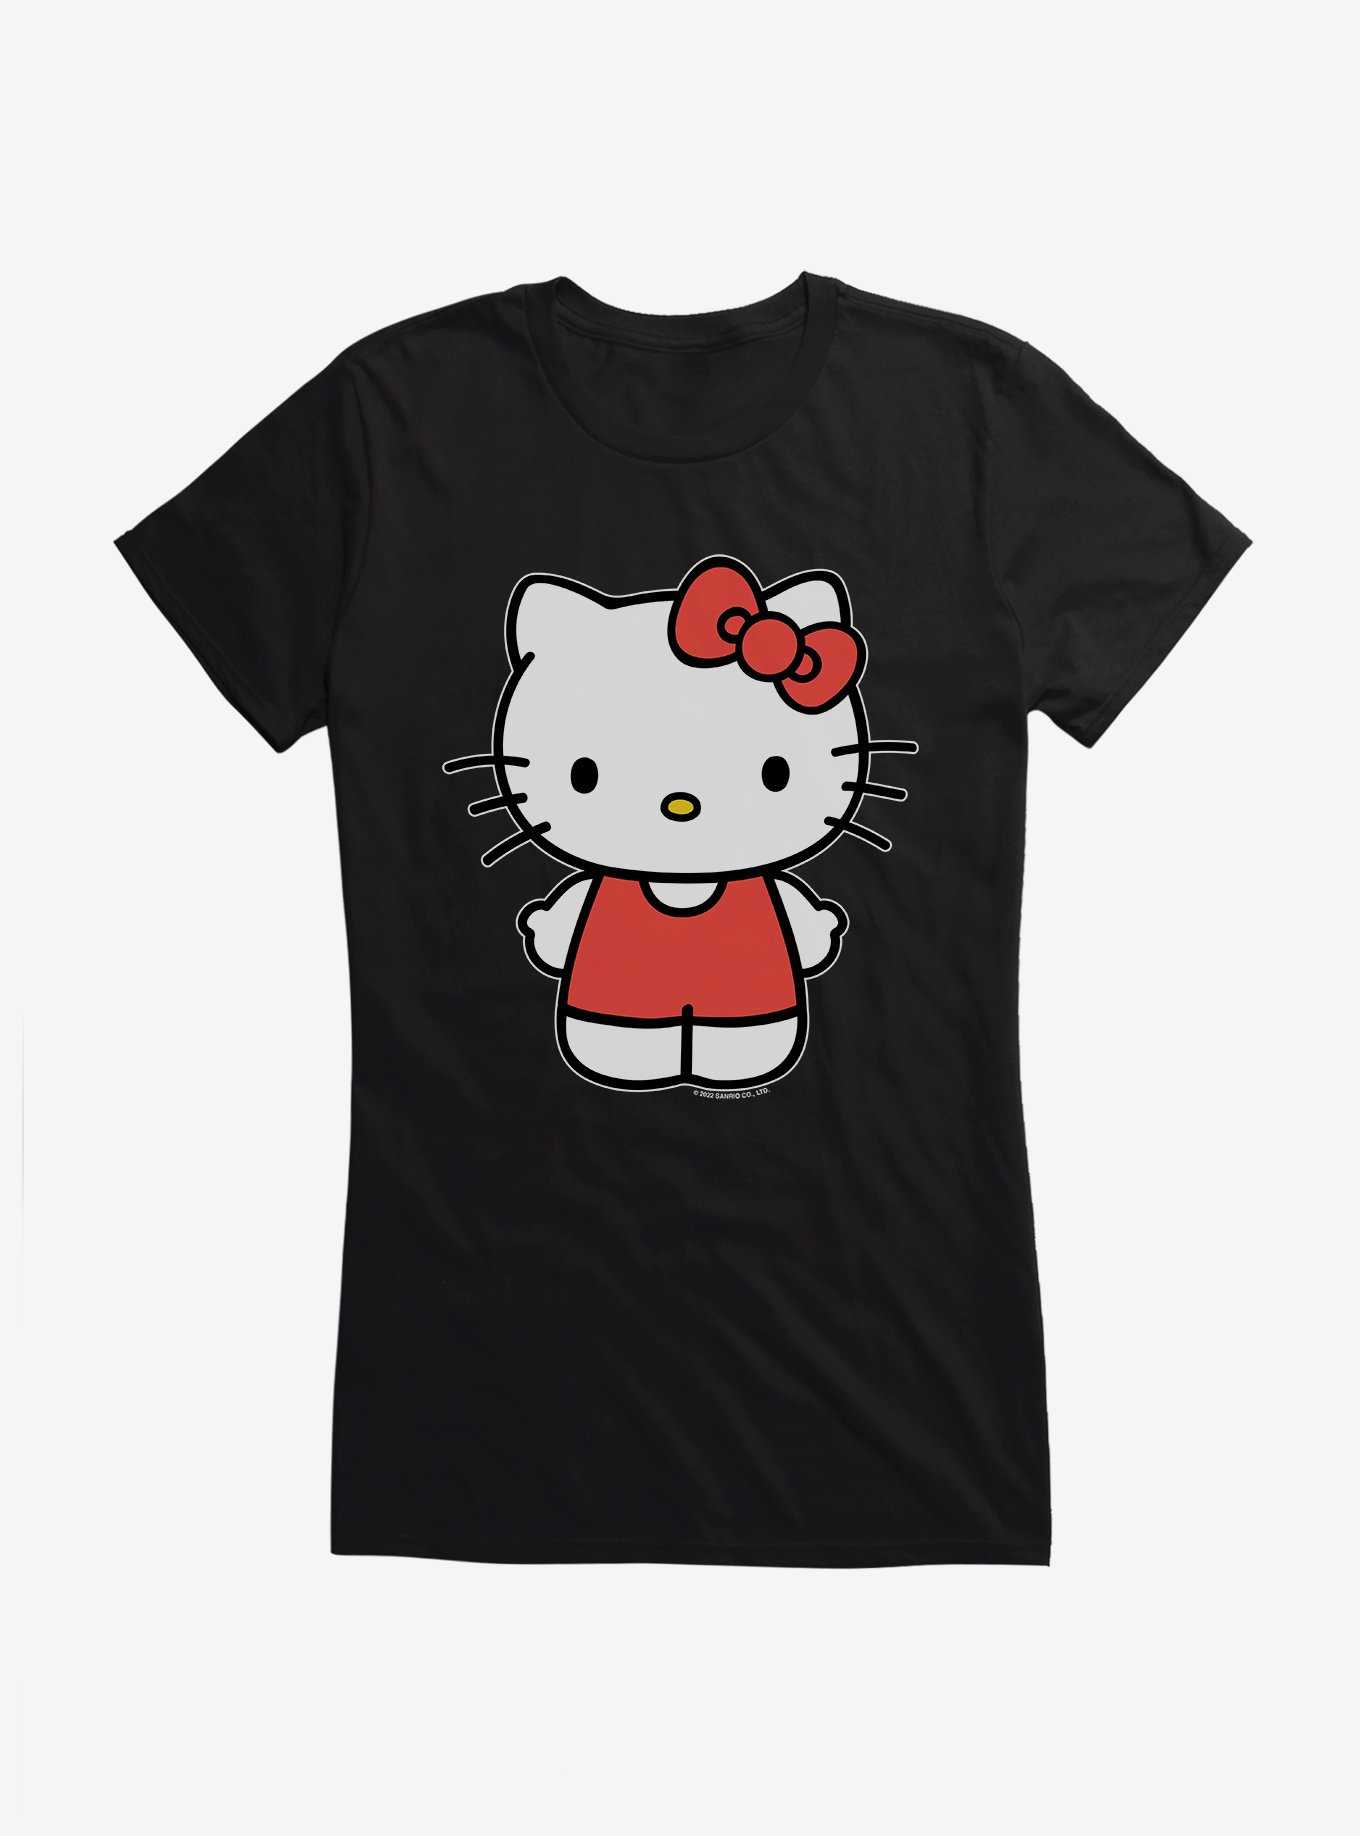 Hello Kitty Outfit Girls T-Shirt, BLACK, hi-res